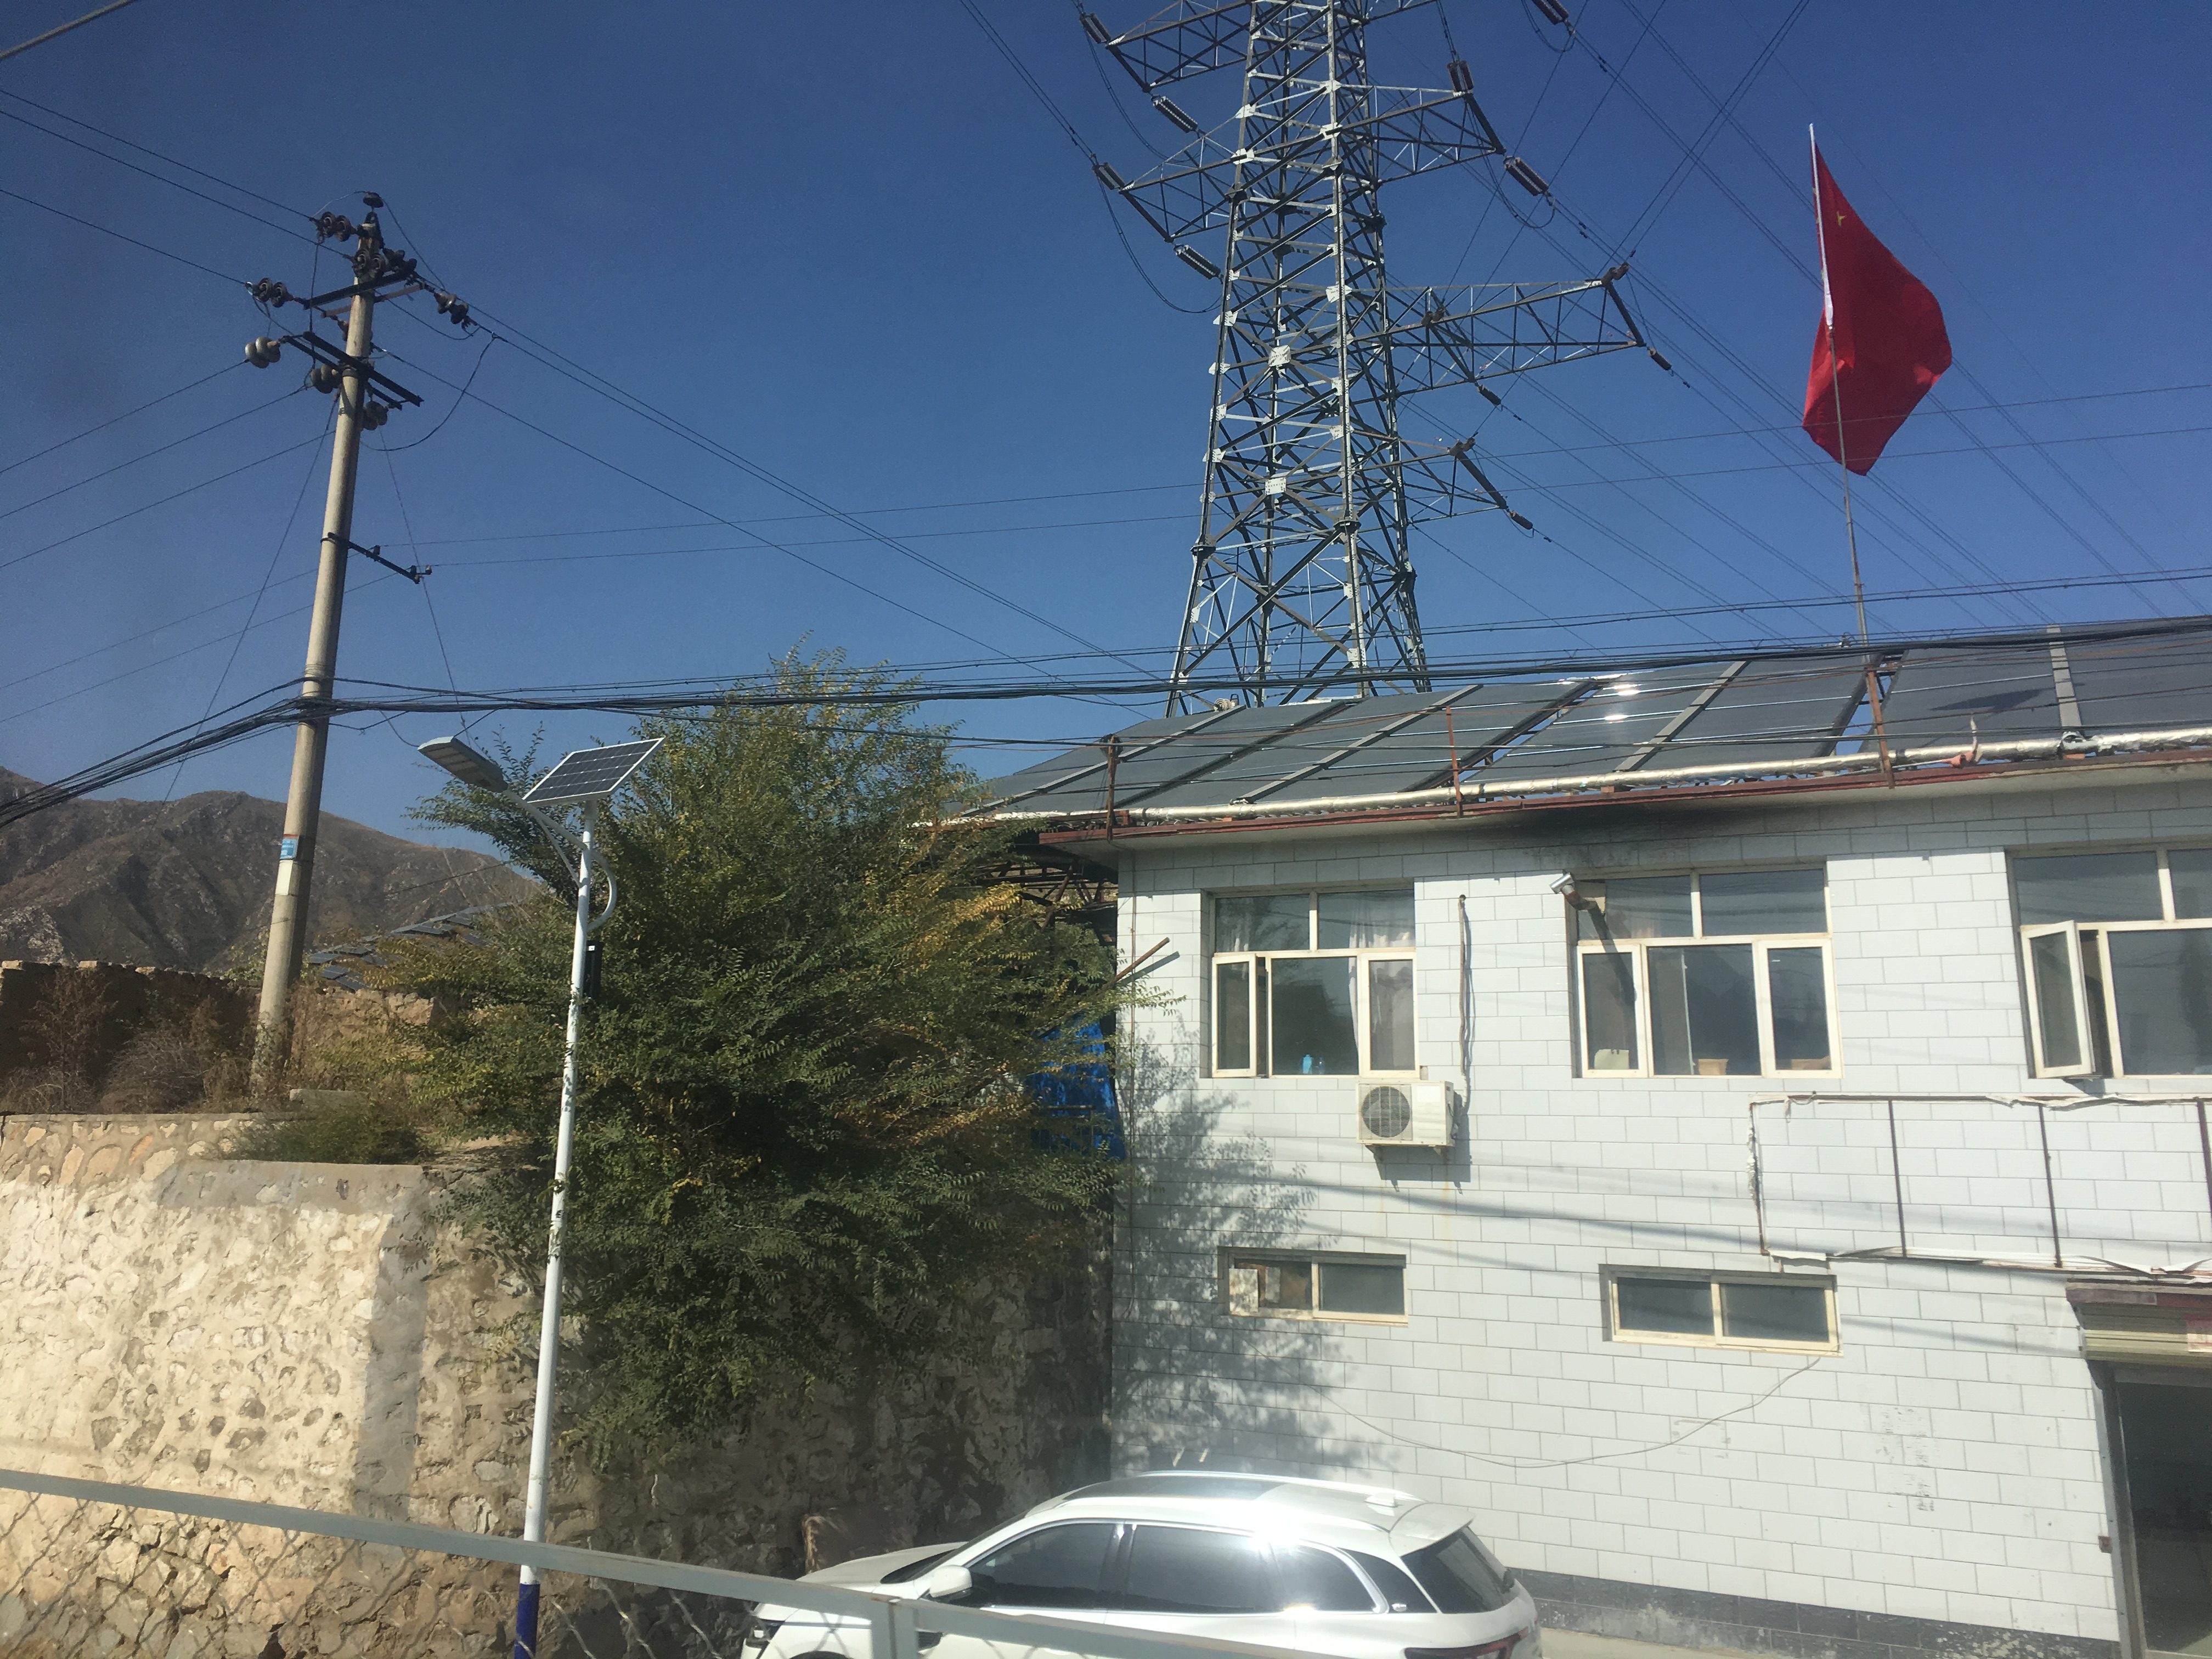 Chinese flag flutters over what could be solar panels